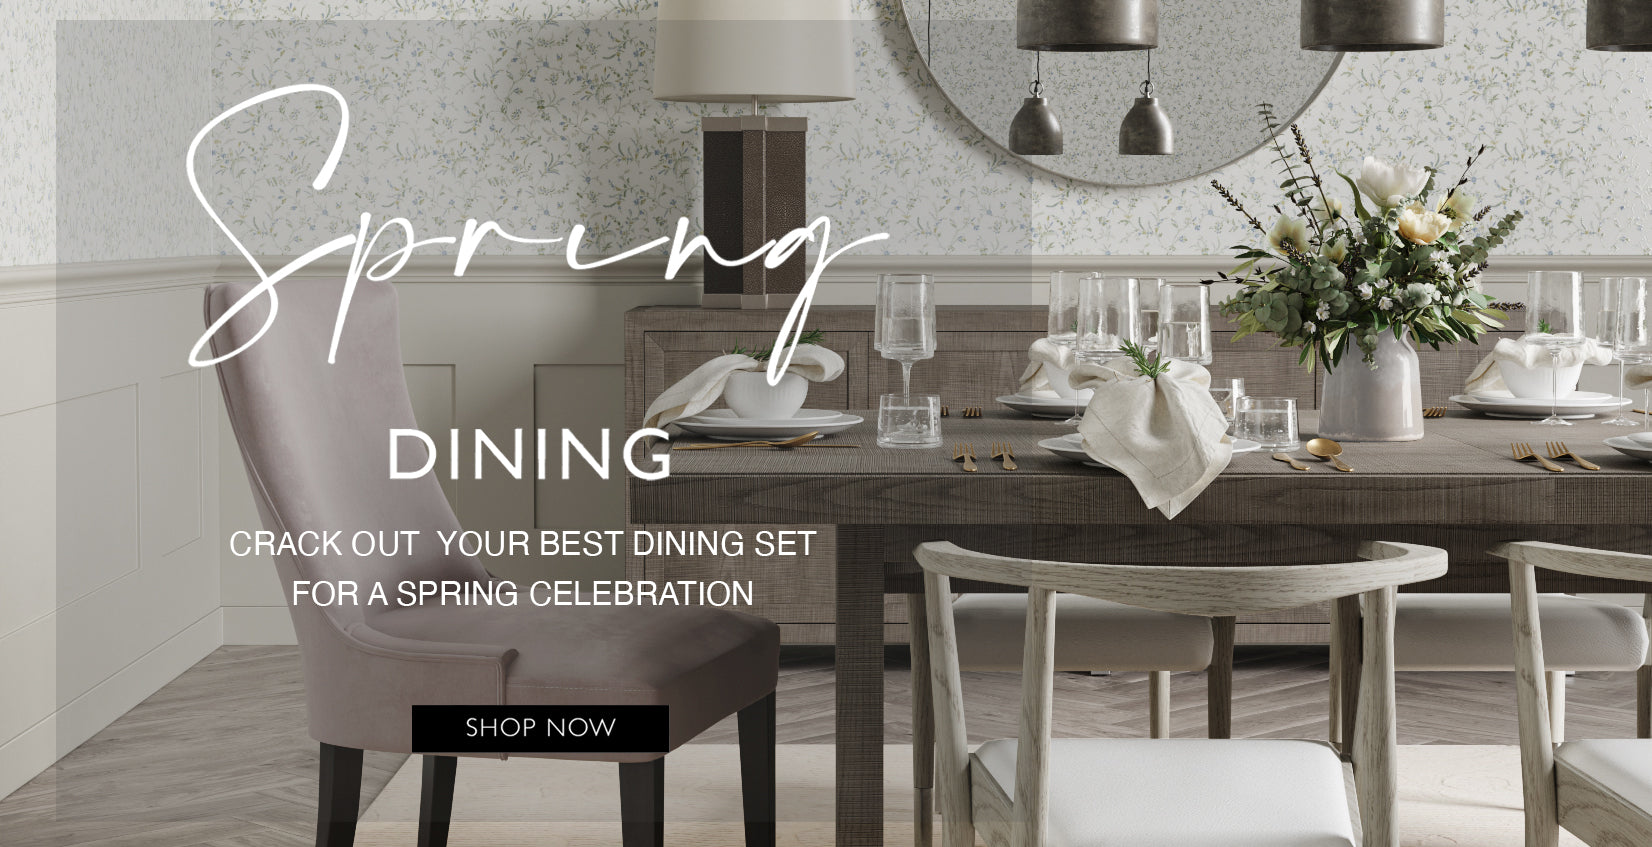 Image showing the stylish dining room setup from Sonder Living's collection, featuring modern furniture and elegant design elements.